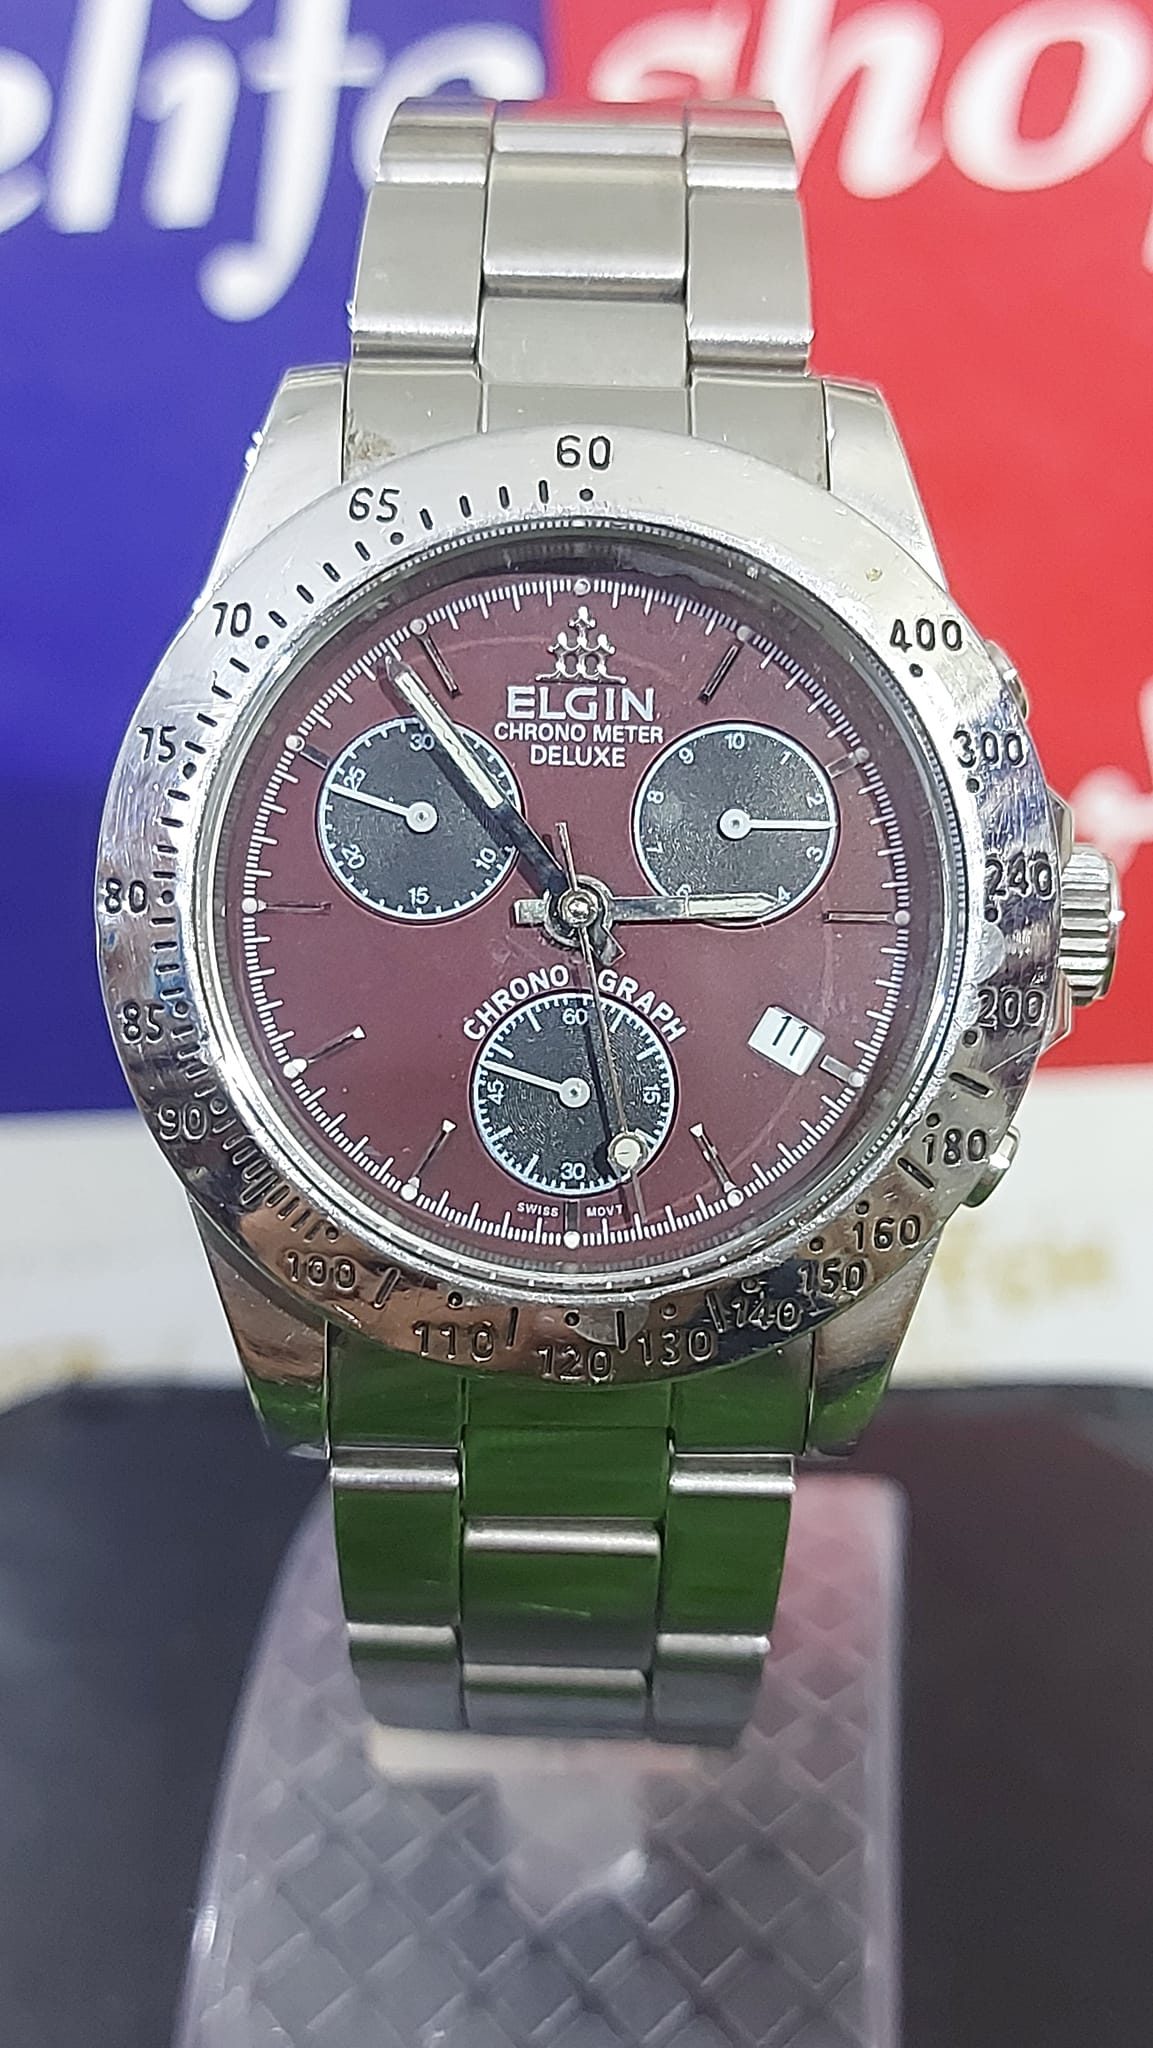 ELGIN Swiss made Chronograph Deluxe FK-350 Chronograph Wrist Watch For Men's